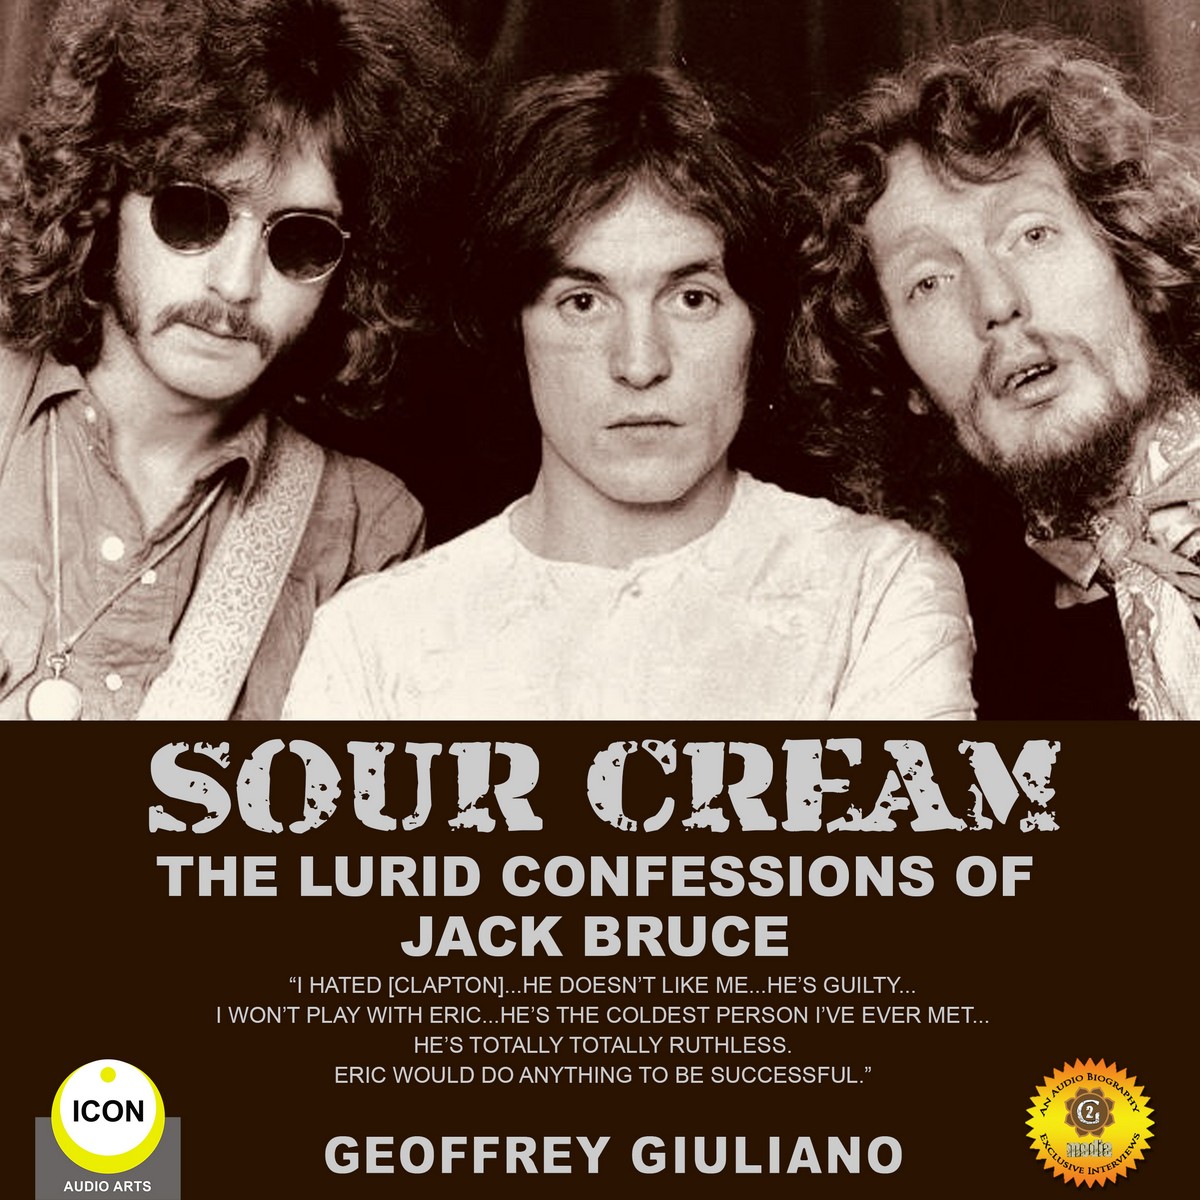 Sour Cream – the Lurid Confessions of Jack Bruce